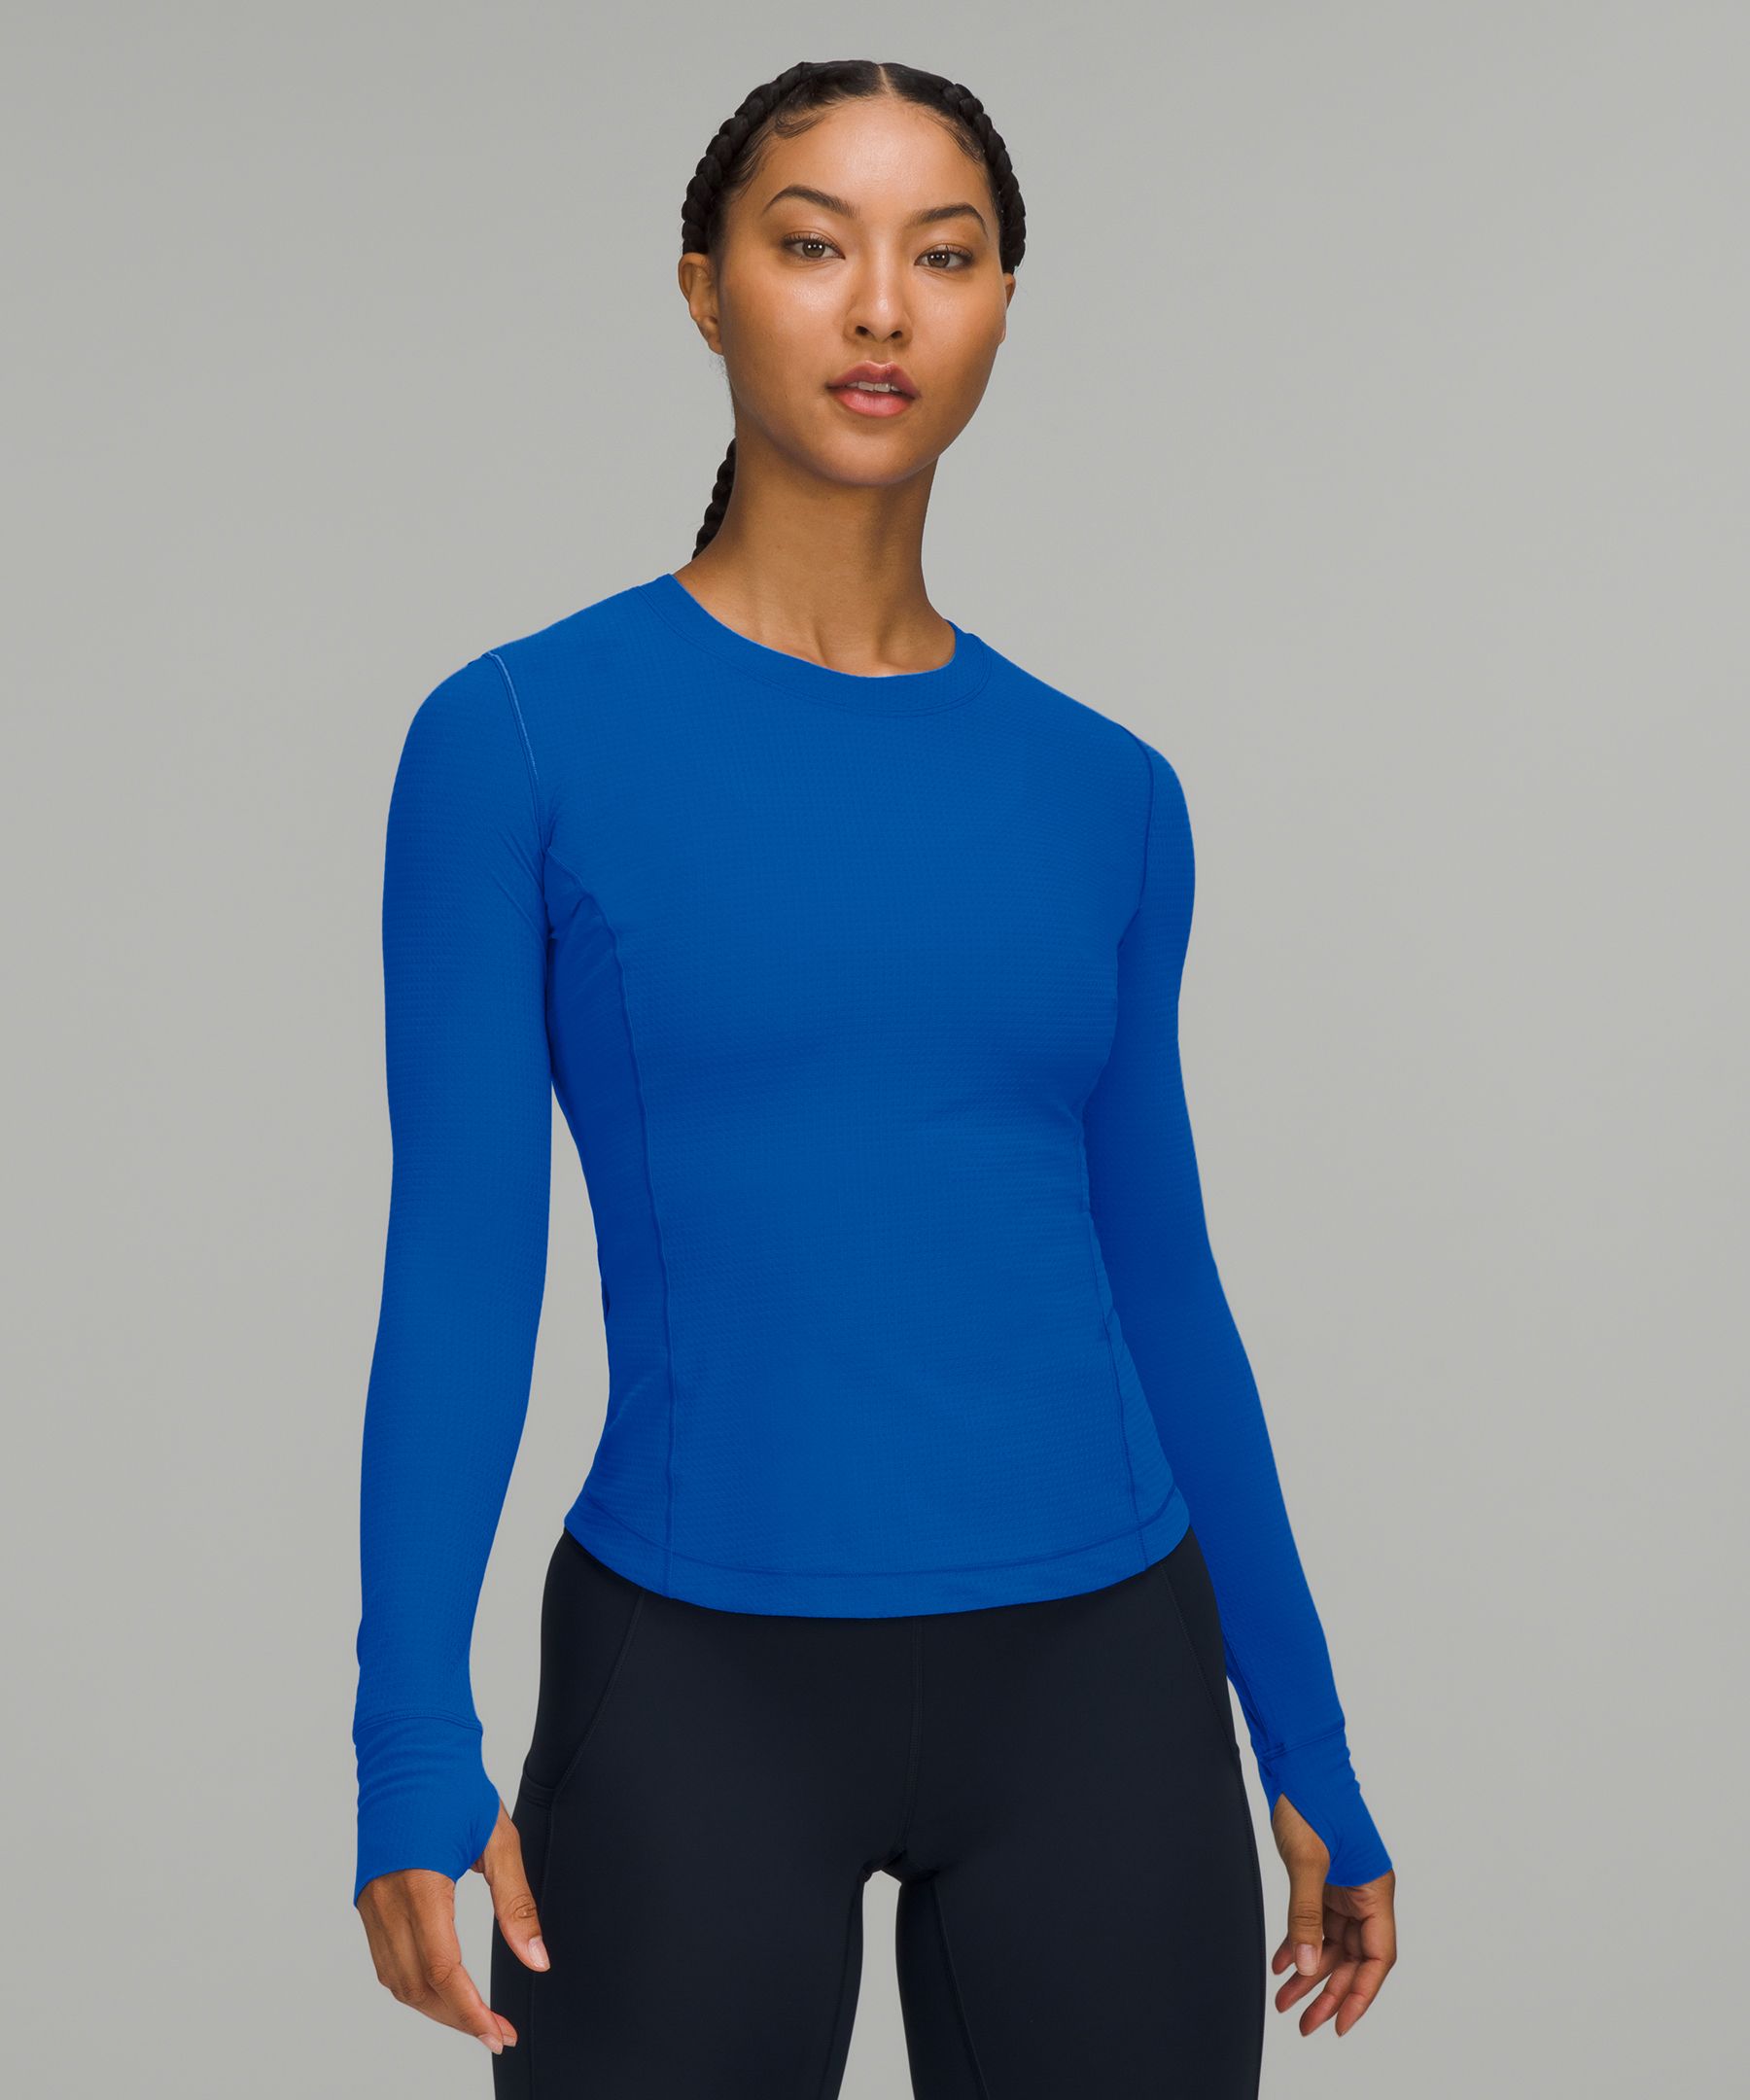 Thoughts on the ventilated mesh-back running long sleeve shirt